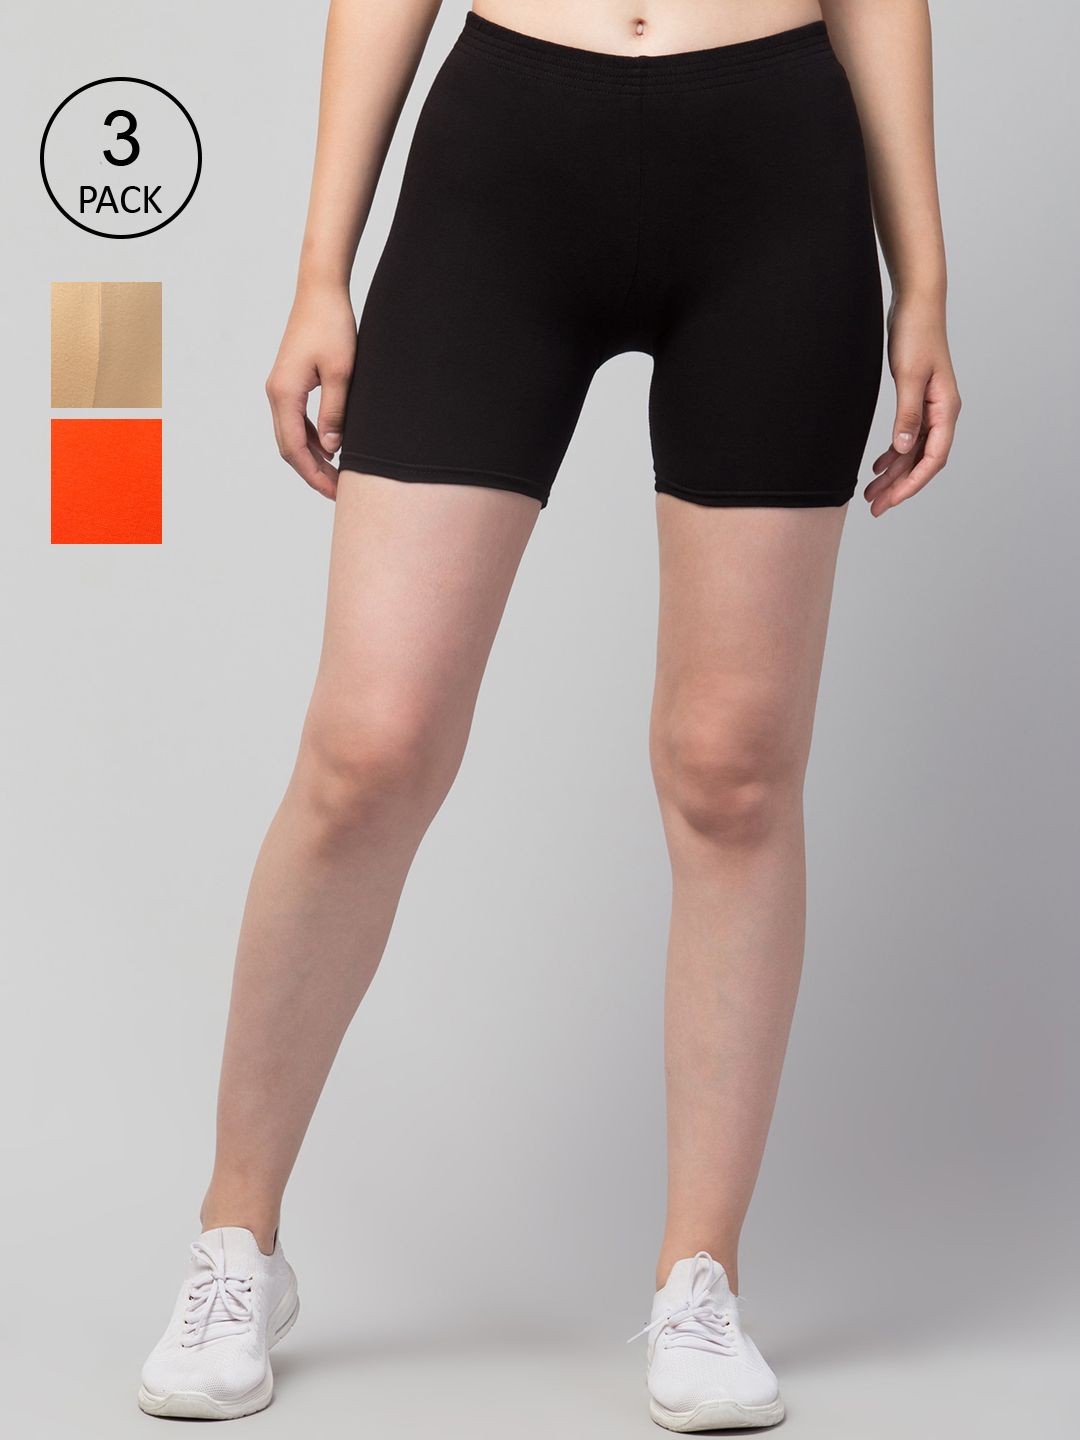 Apraa & Parma Women Black Slim Fit Cycling Sports Shorts Price in India